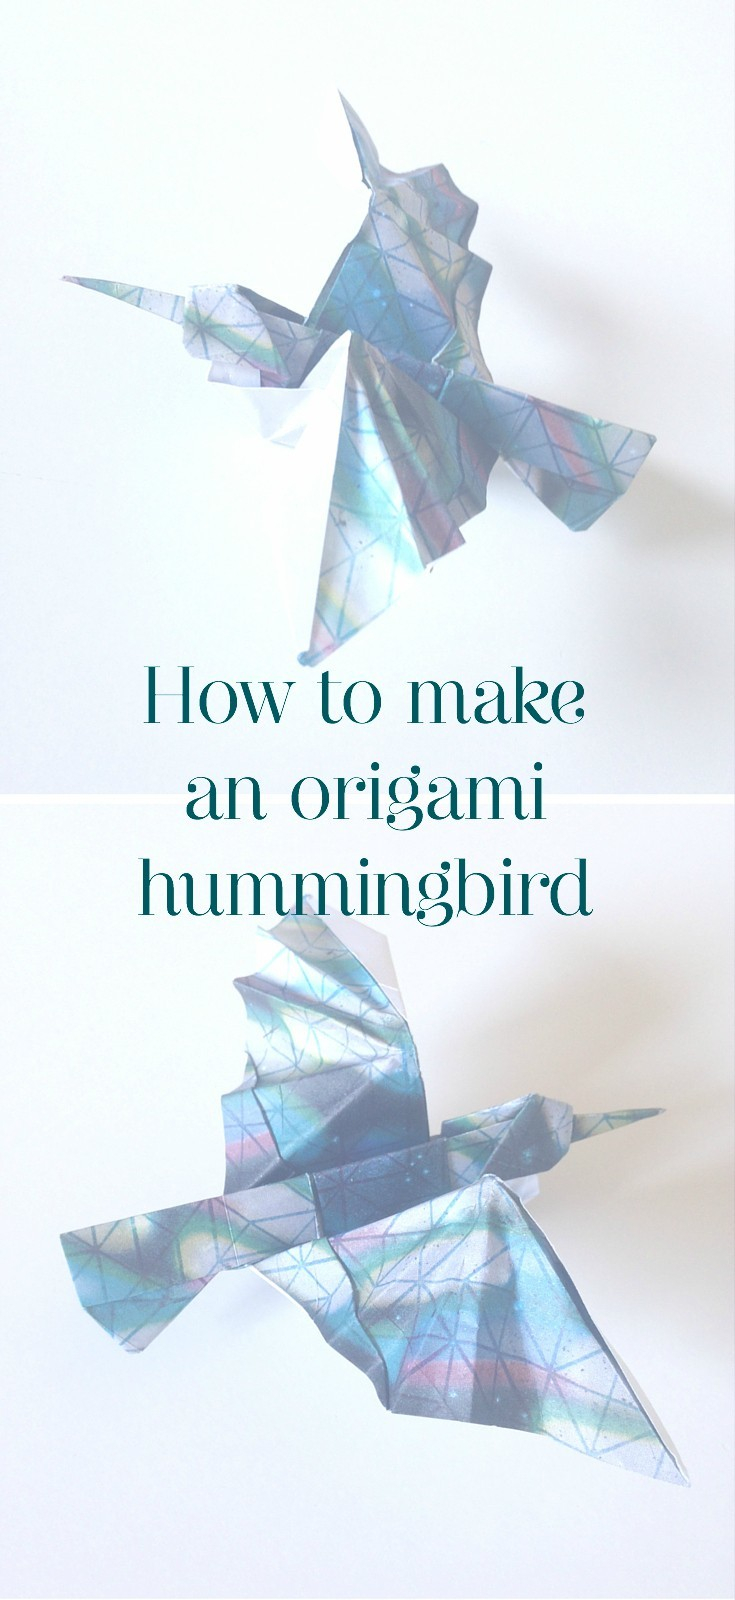 Origami Hummingbird Step By Step How To Make An Origami Hummingbird The Paperdashery